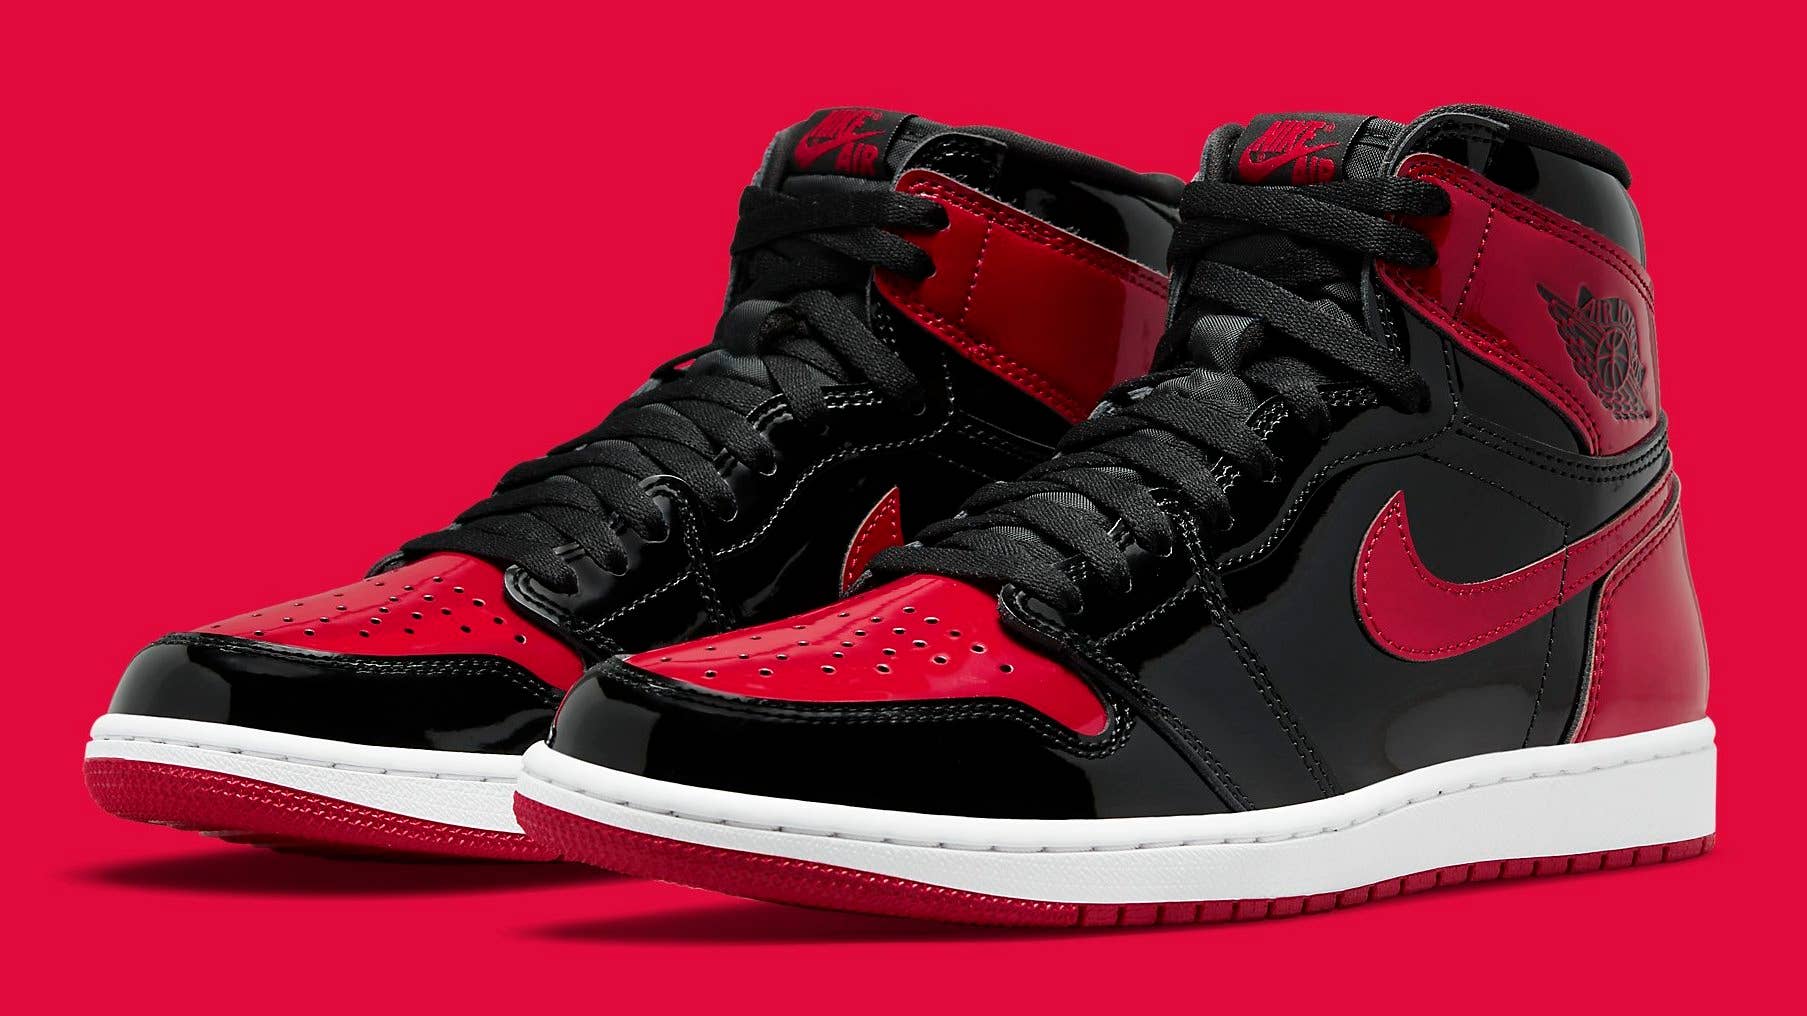 Patent Leather 'Bred' Air 1s to Release This December | Complex